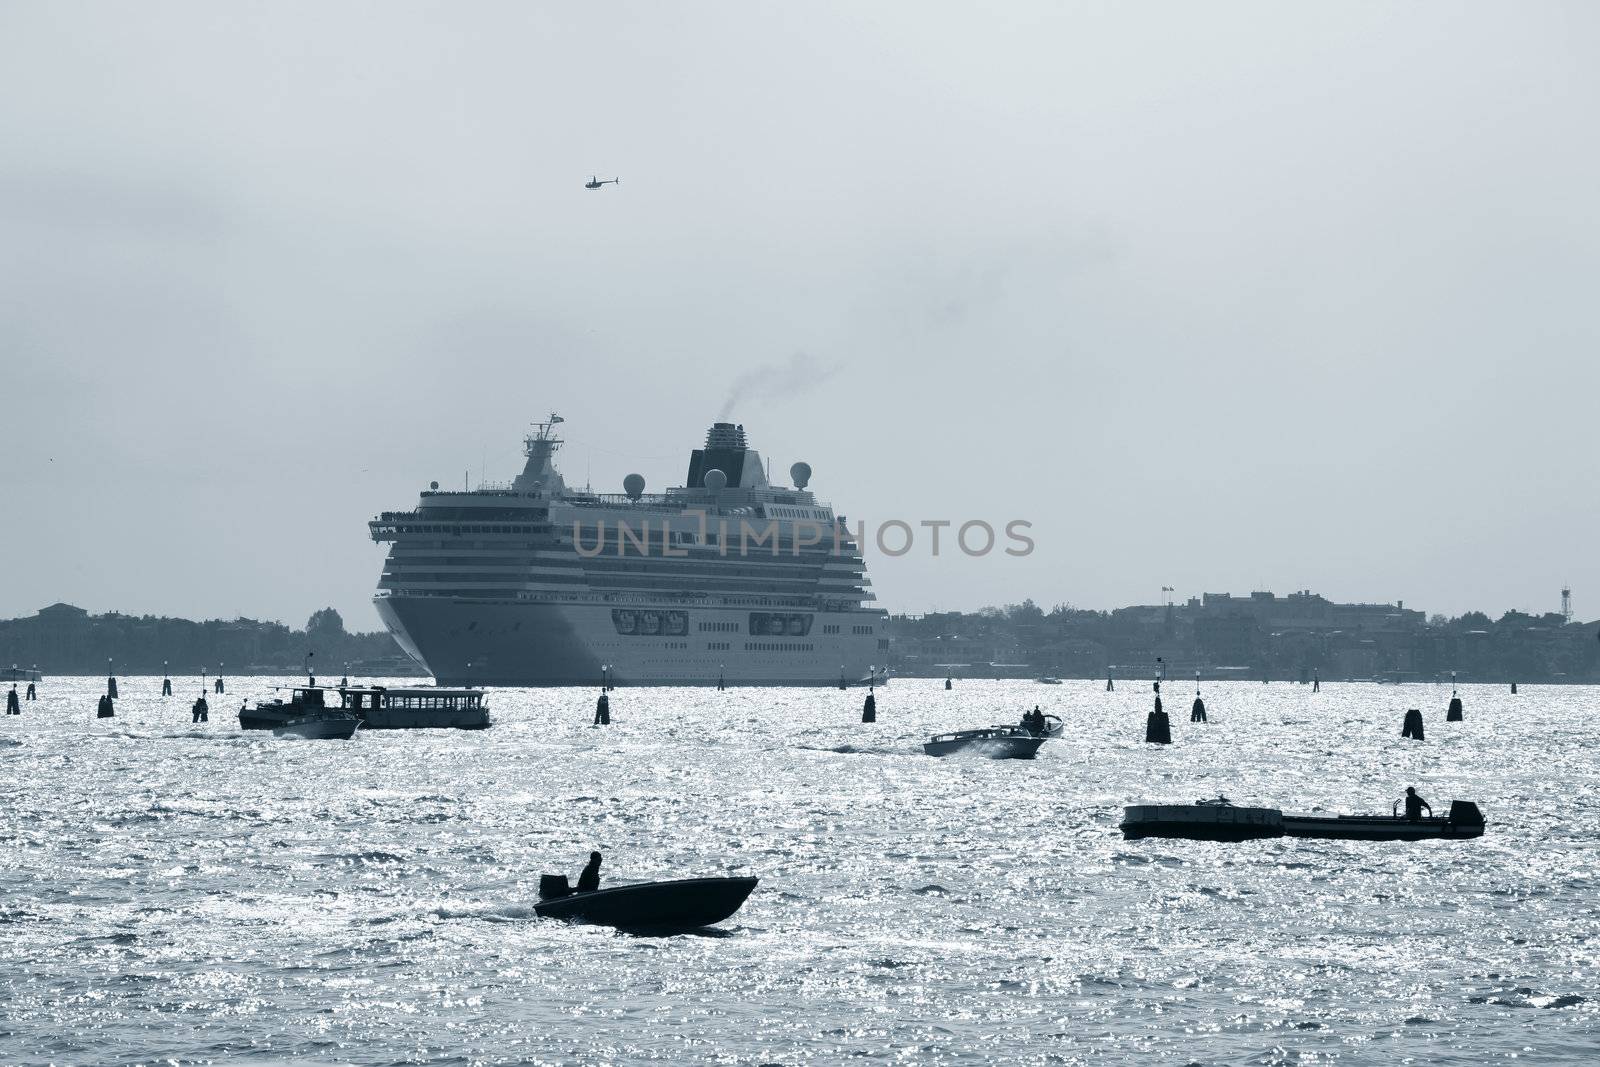 Heavy traffic outside the city of Venice - Italy. Cruise liner, chopper, ferry, taxi and transport wessels around each other in the lagoon.